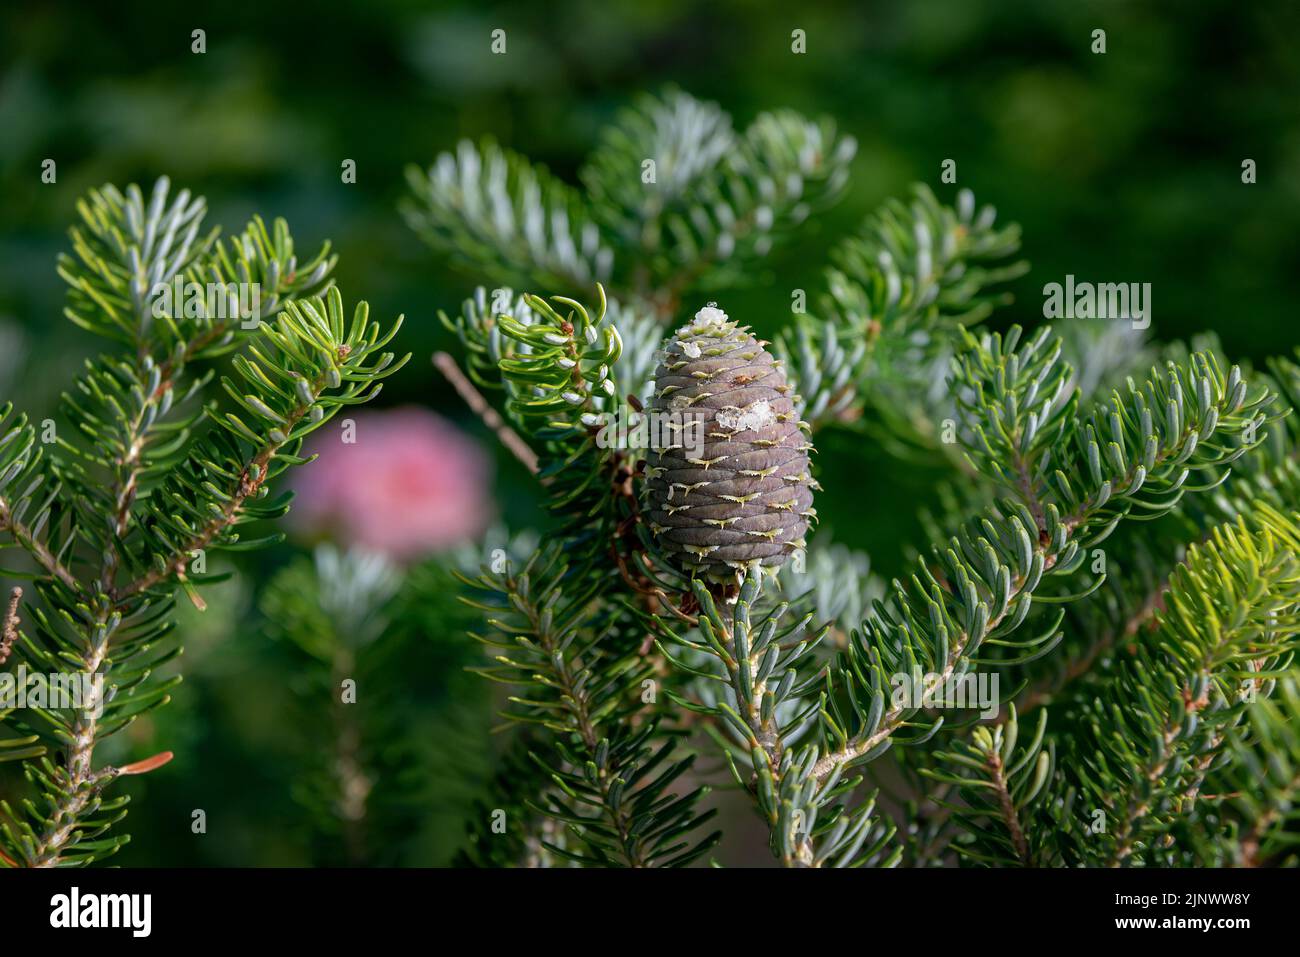 Cone of Abies koreana Silberlocke tree with resin at summer. Close up image Stock Photo